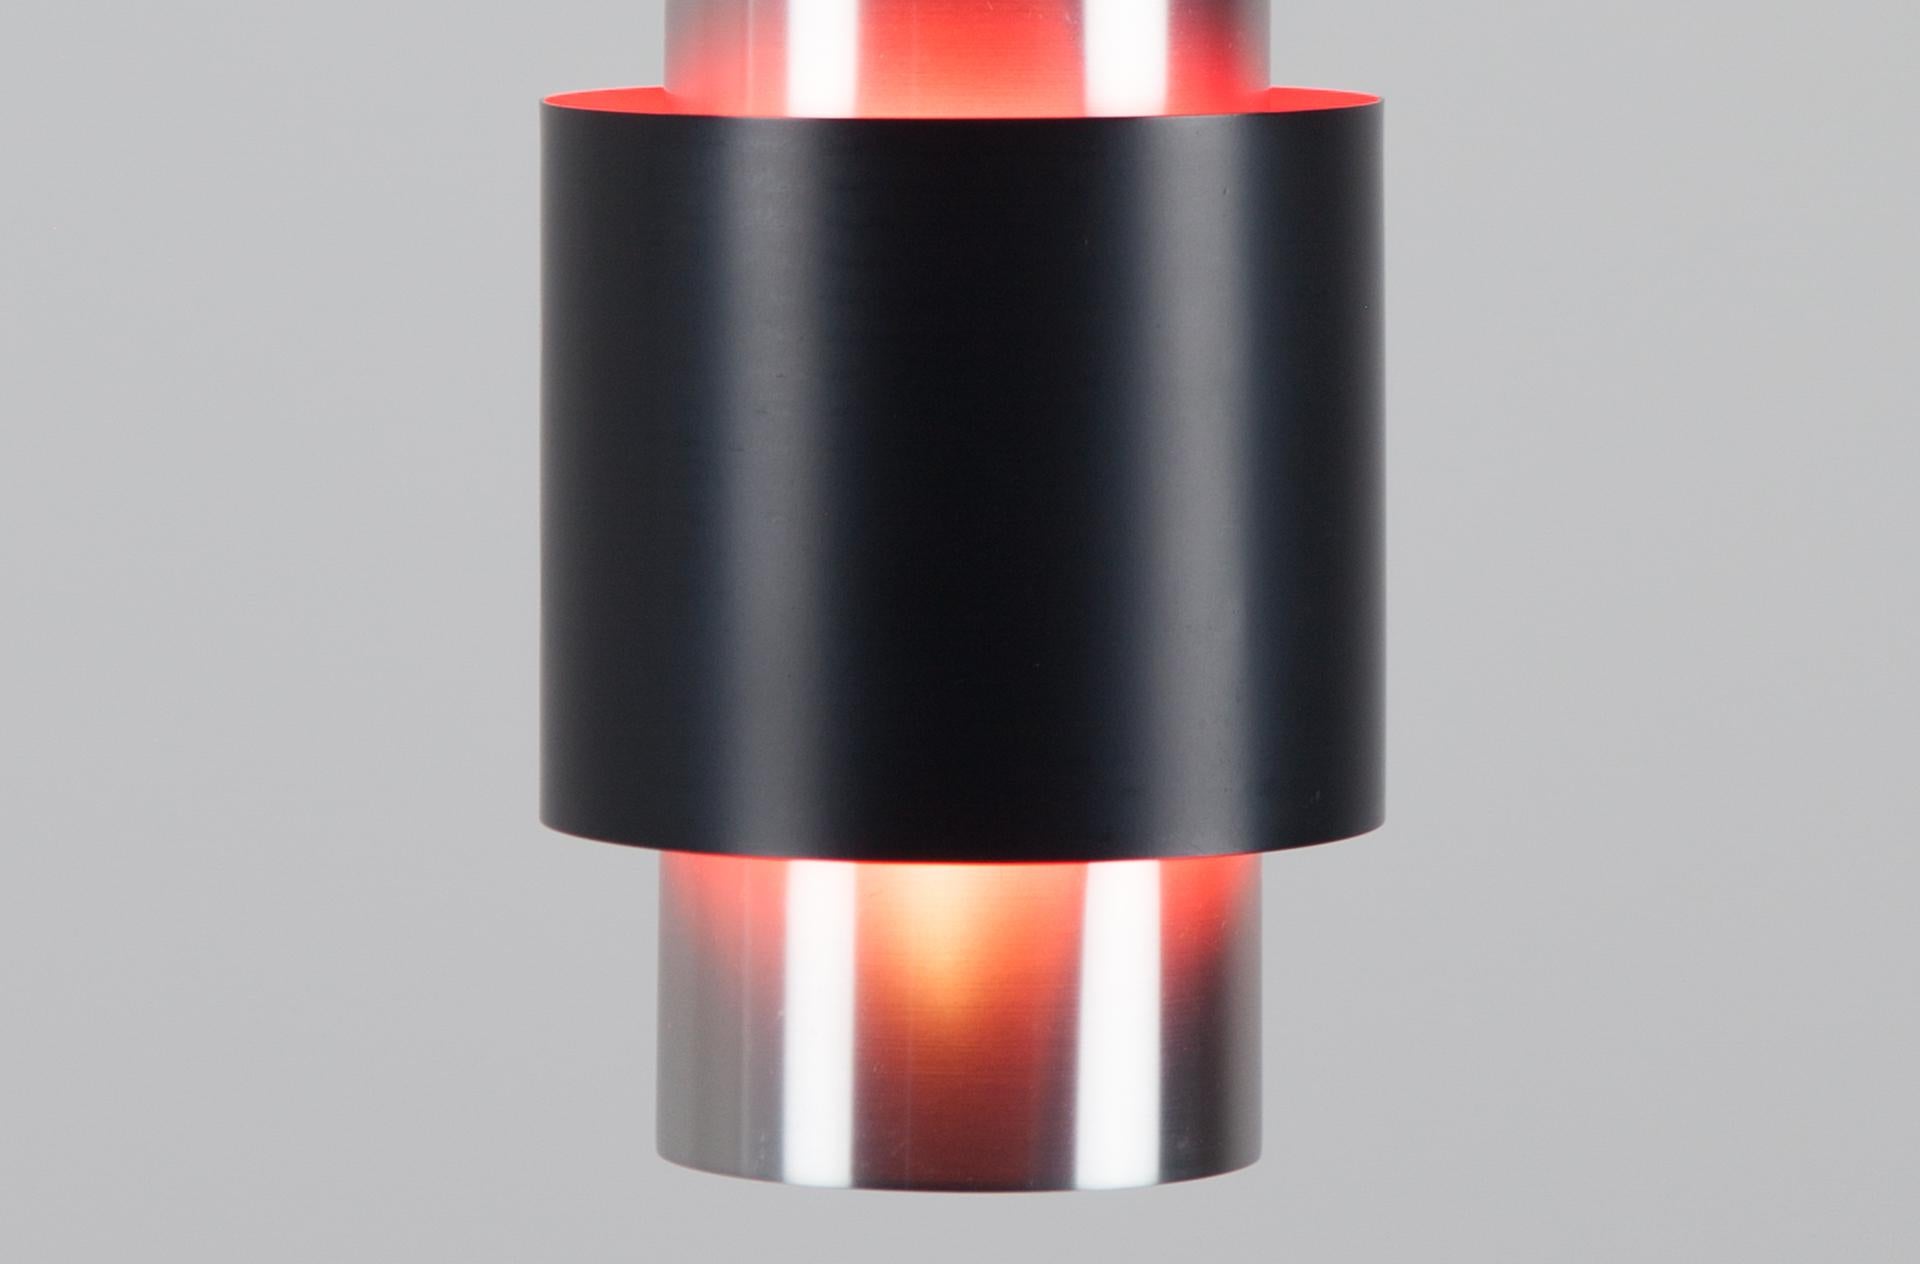 Aluminium and black powder coated aluminium. Excellent condition.
 
This 1967 pendant is one of Hammerborg's most famous designs and consists of three cylinders, a structure Hammerborg loved exploring with. The black cylinder is painted pink on